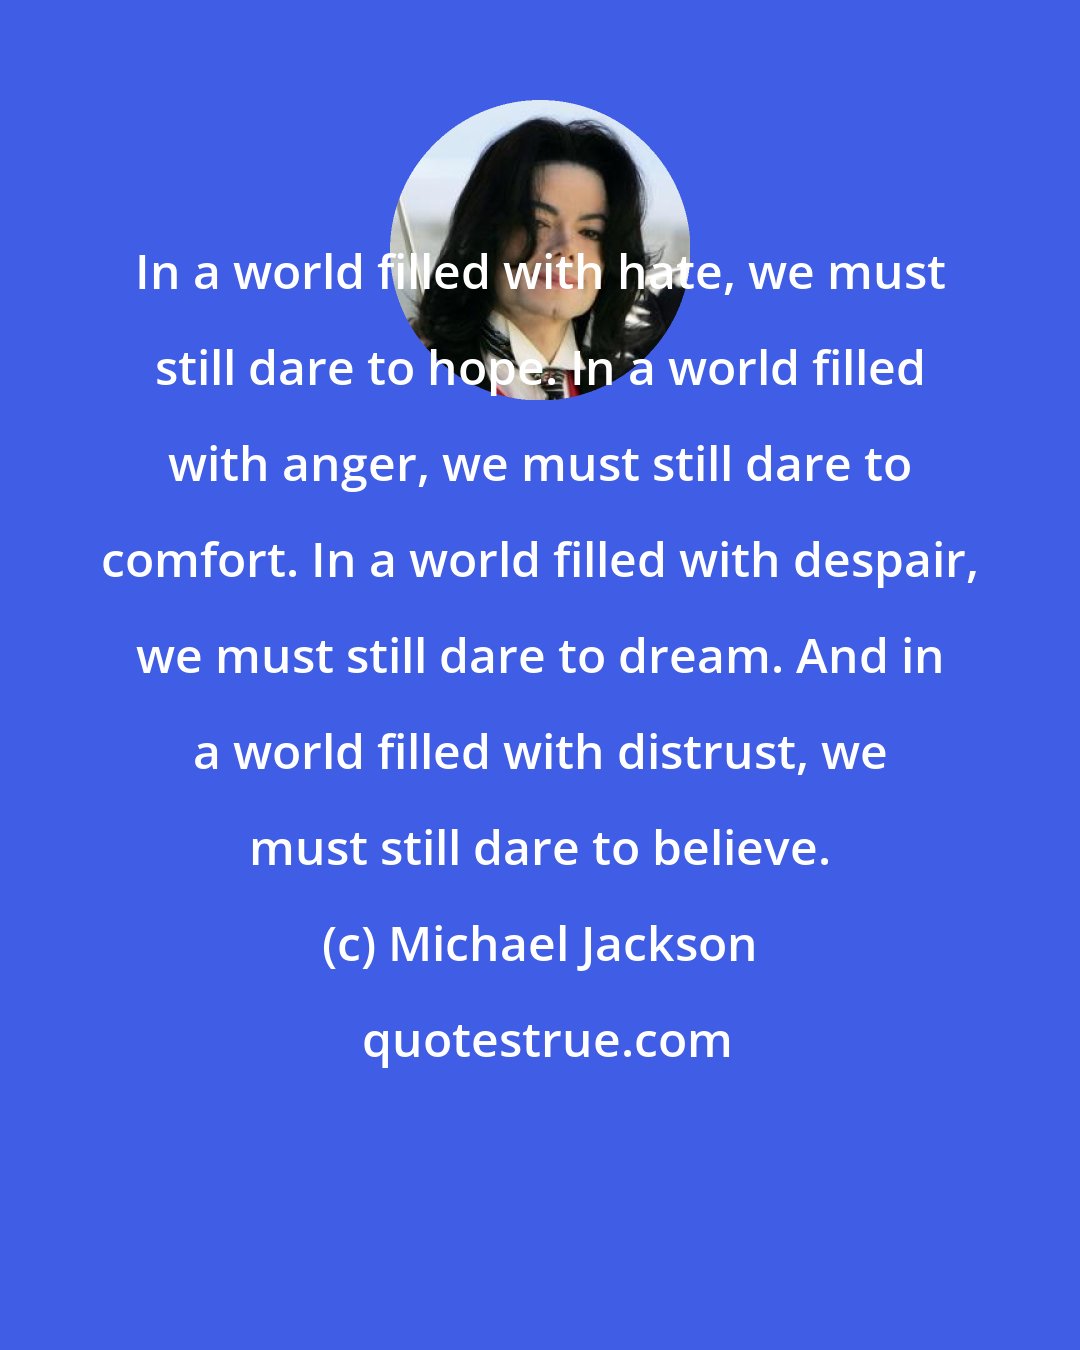 Michael Jackson: In a world filled with hate, we must still dare to hope. In a world filled with anger, we must still dare to comfort. In a world filled with despair, we must still dare to dream. And in a world filled with distrust, we must still dare to believe.